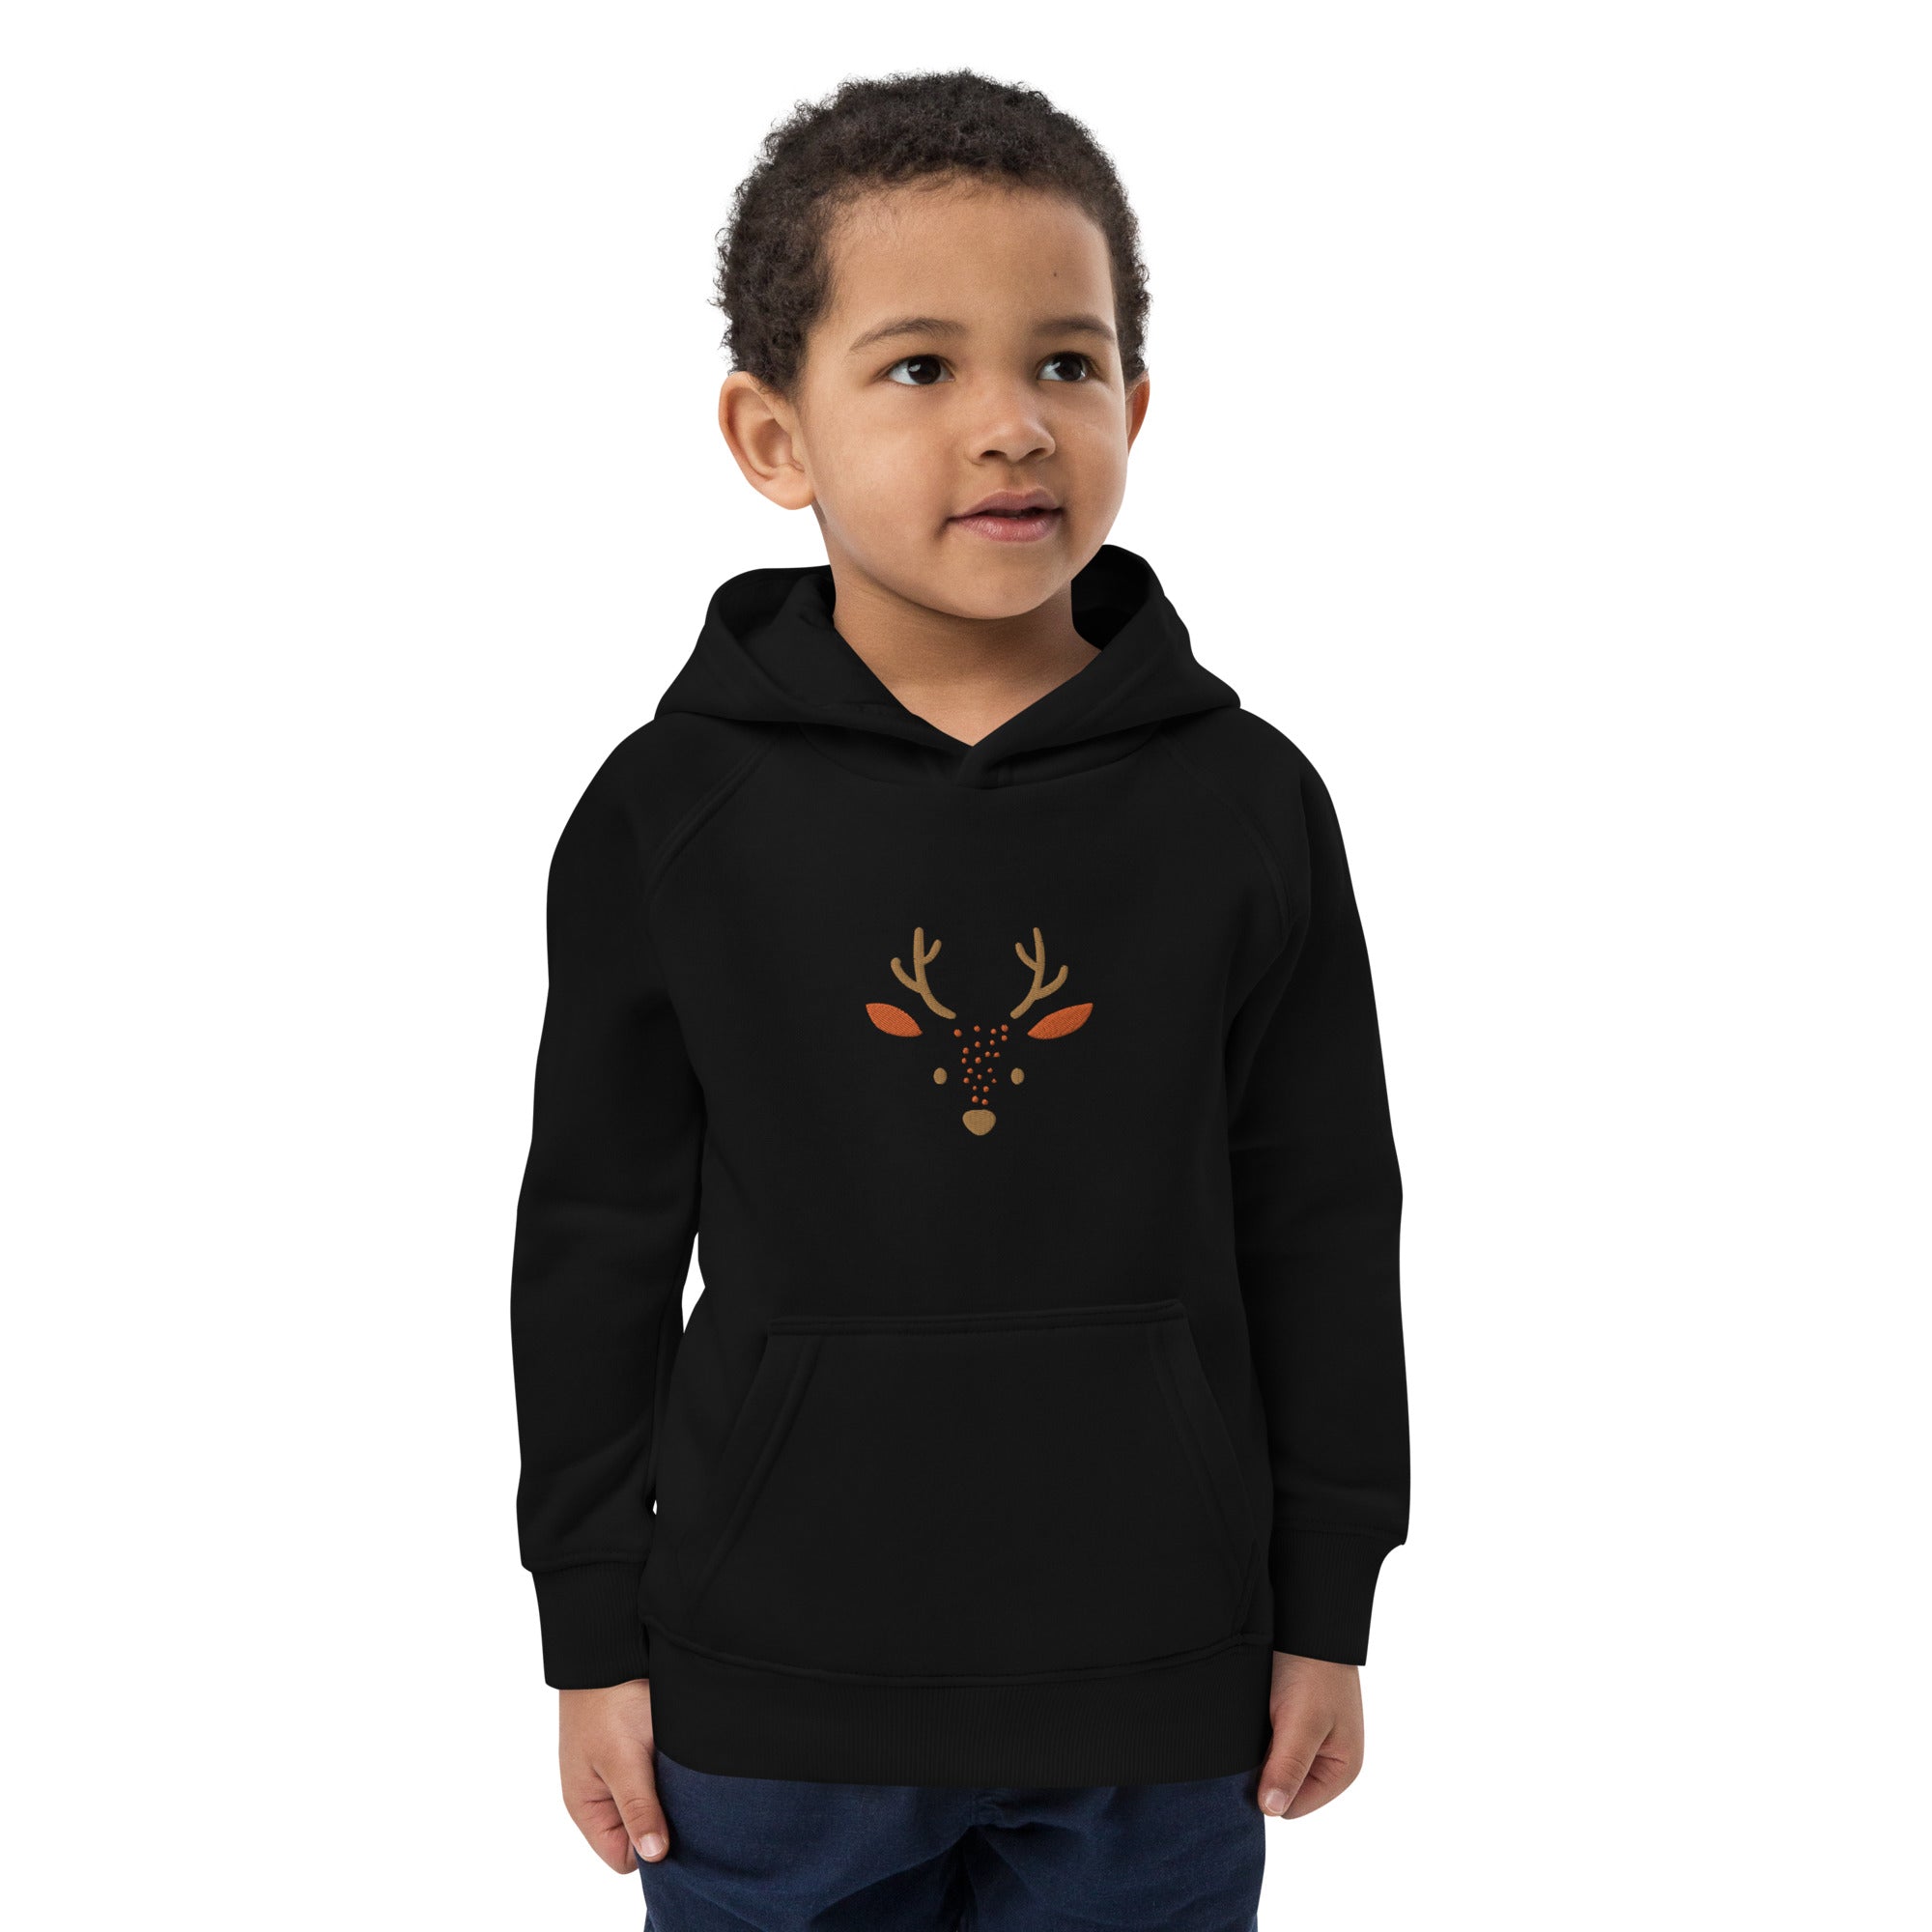 Deer 2 Kids Eco Hoodie with cute animals, Organic Cotton pullover for children, gift idea for kids, soft hoodie for kids for Christmas-2